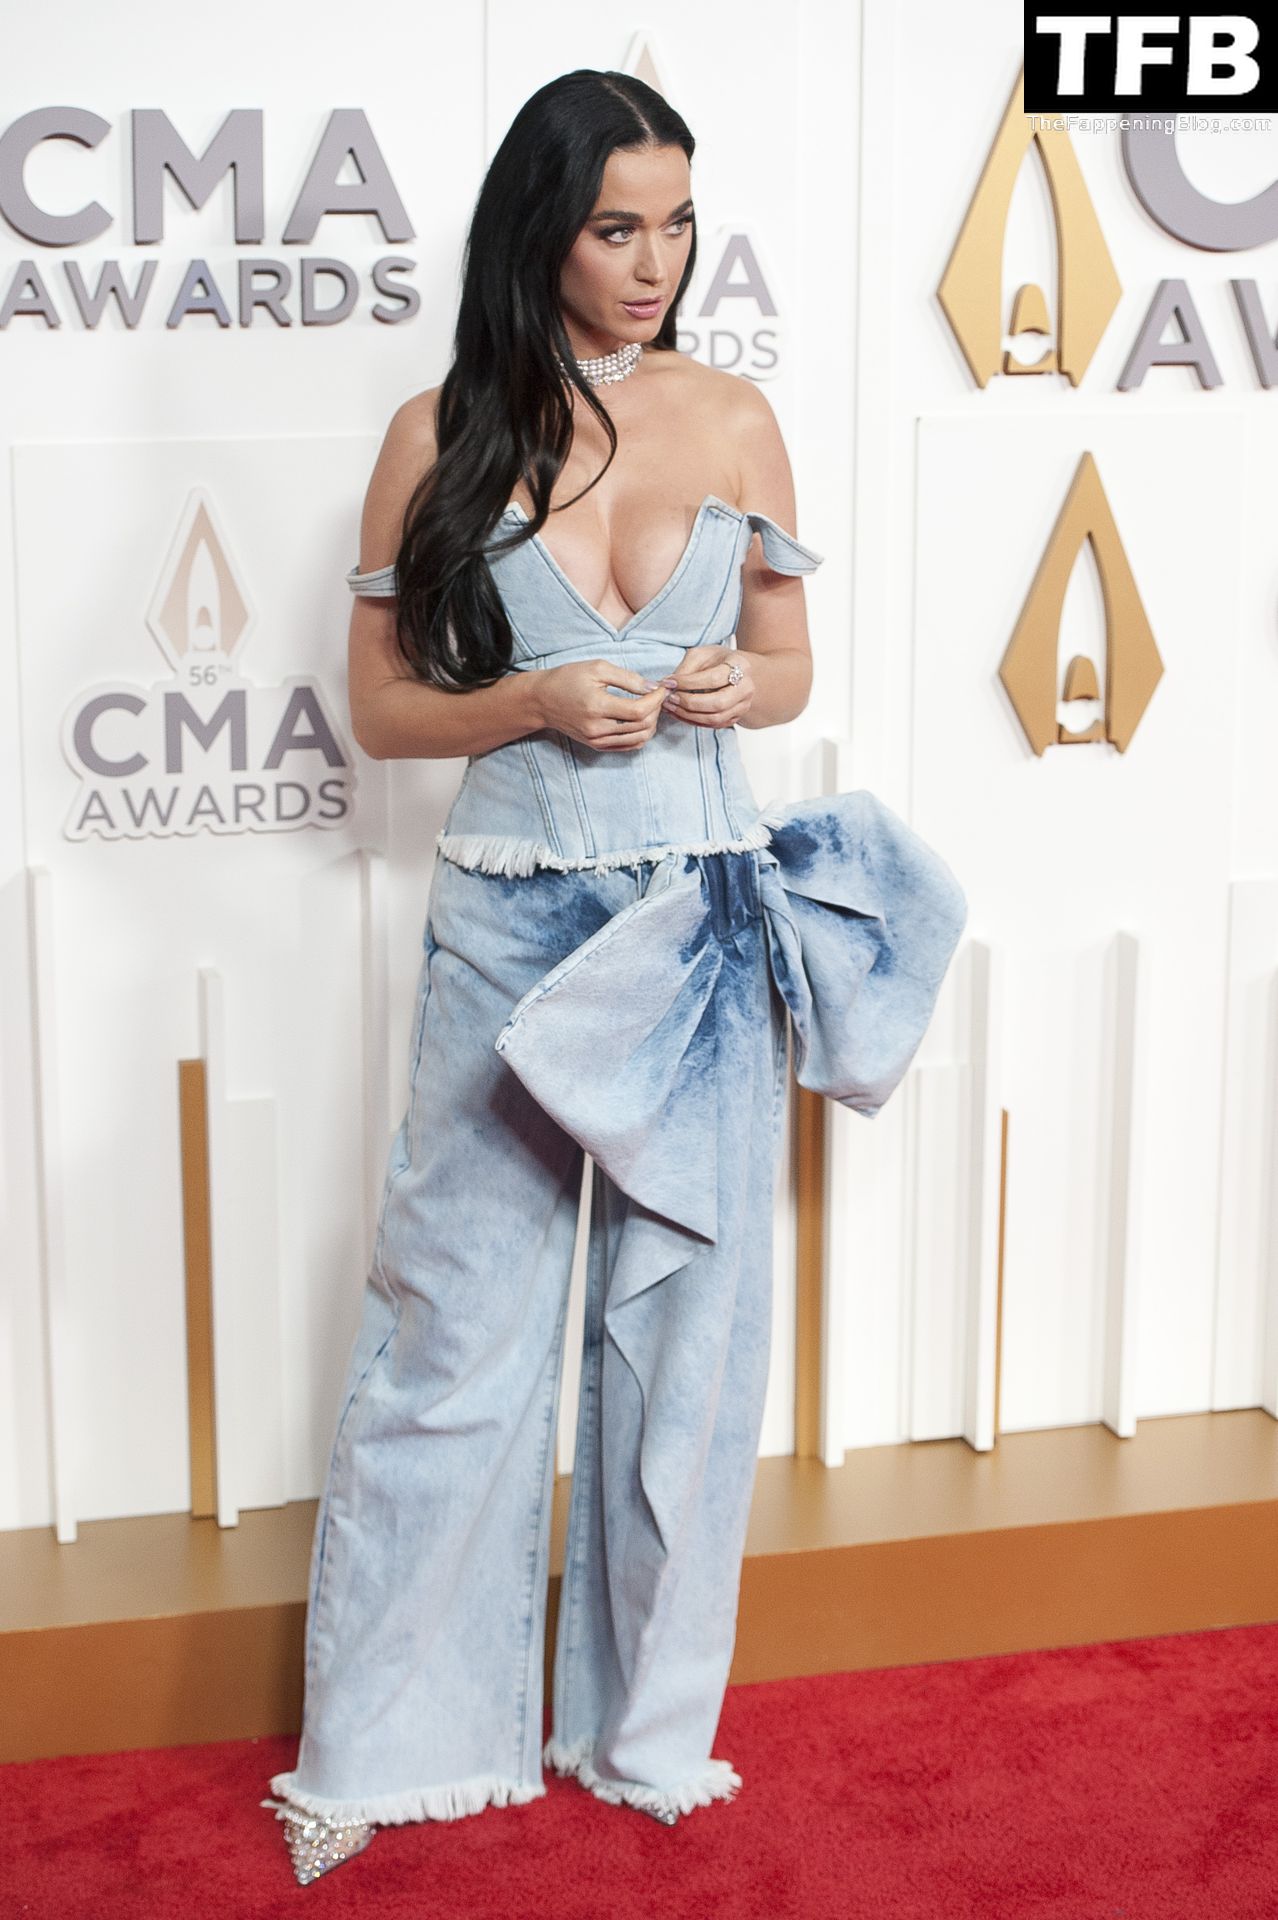 Katy Perry Sexy 6 thefappeningblog.com  - Katy Perry Shows Off Her Sexy Boobs at the 56th Annual CMA Awards (27 Photos)